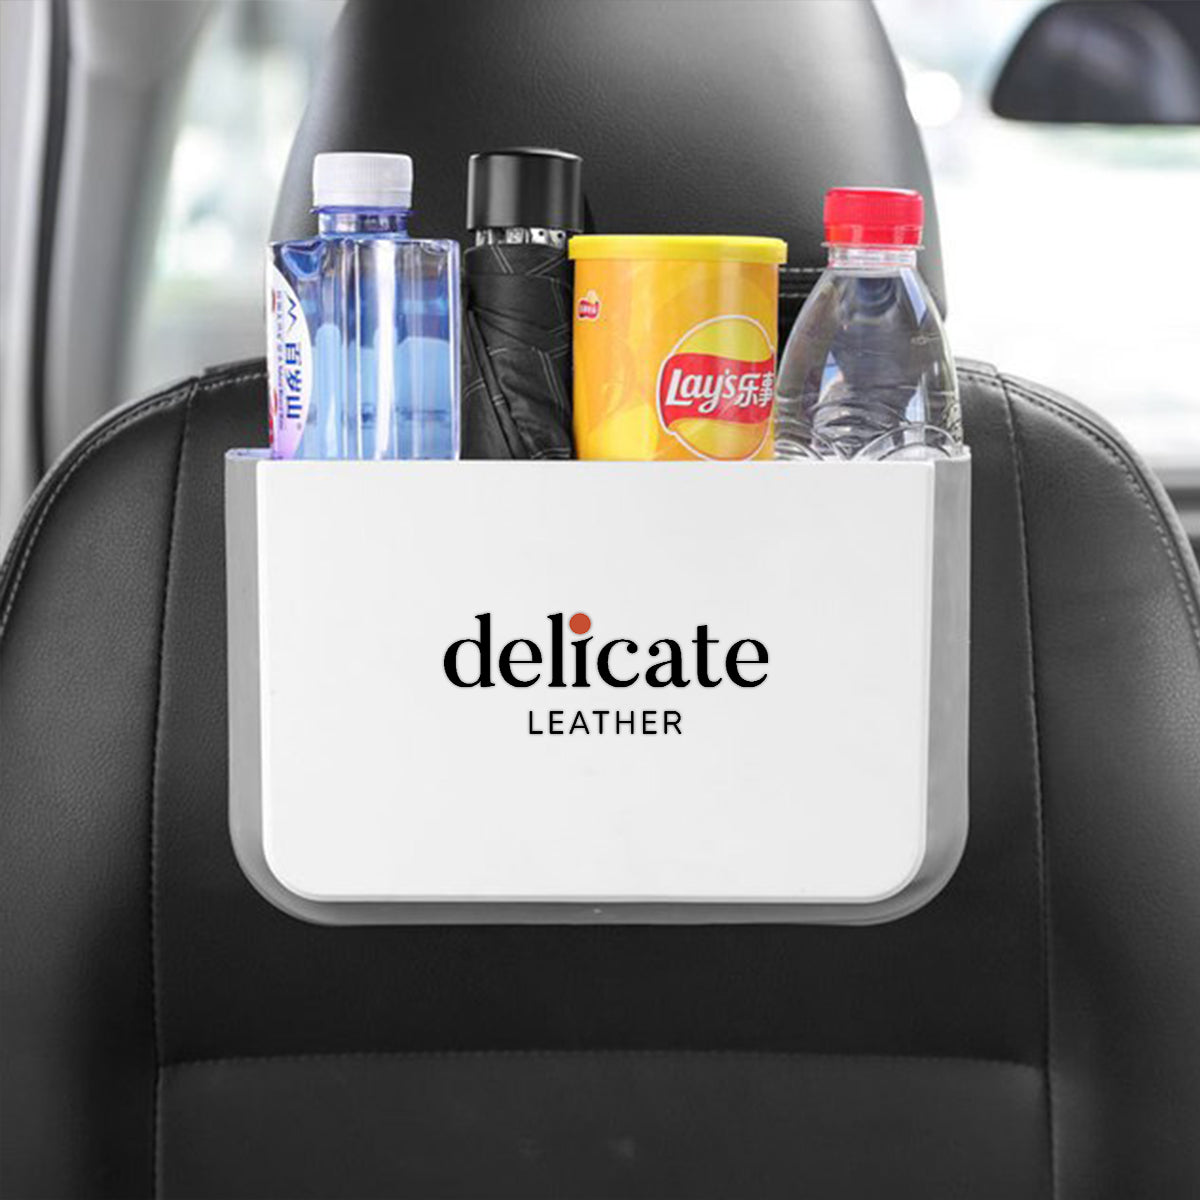 Hanging Waterproof Car Trash can-Foldable, Custom For Your Cars, Waterproof, and Equipped with Cup Holders and Trays. Multi-Purpose, Car Accessories NS11992 - Delicate Leather